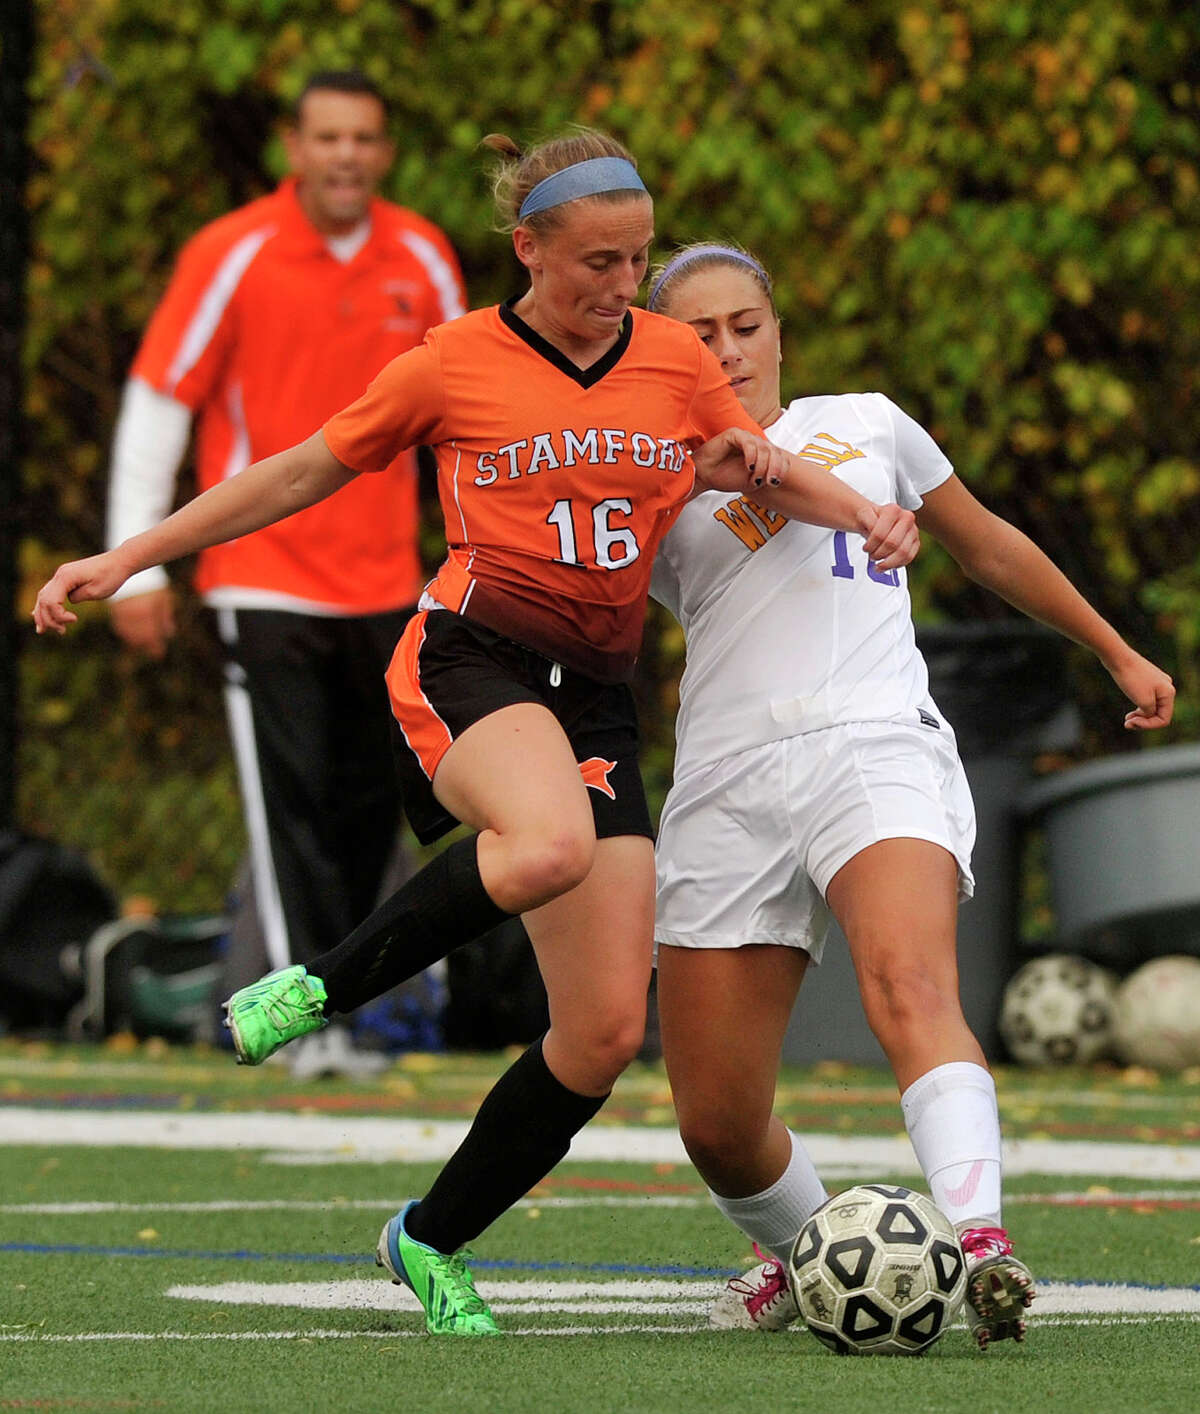 Stamford's Erica Stietzel and Westhill's Natalie Druehl compete for control of the ball during their game at Westhill High School in Stamford, Conn., on Tuesday, Oct. 14, 2014. Westhill won, 4-0.